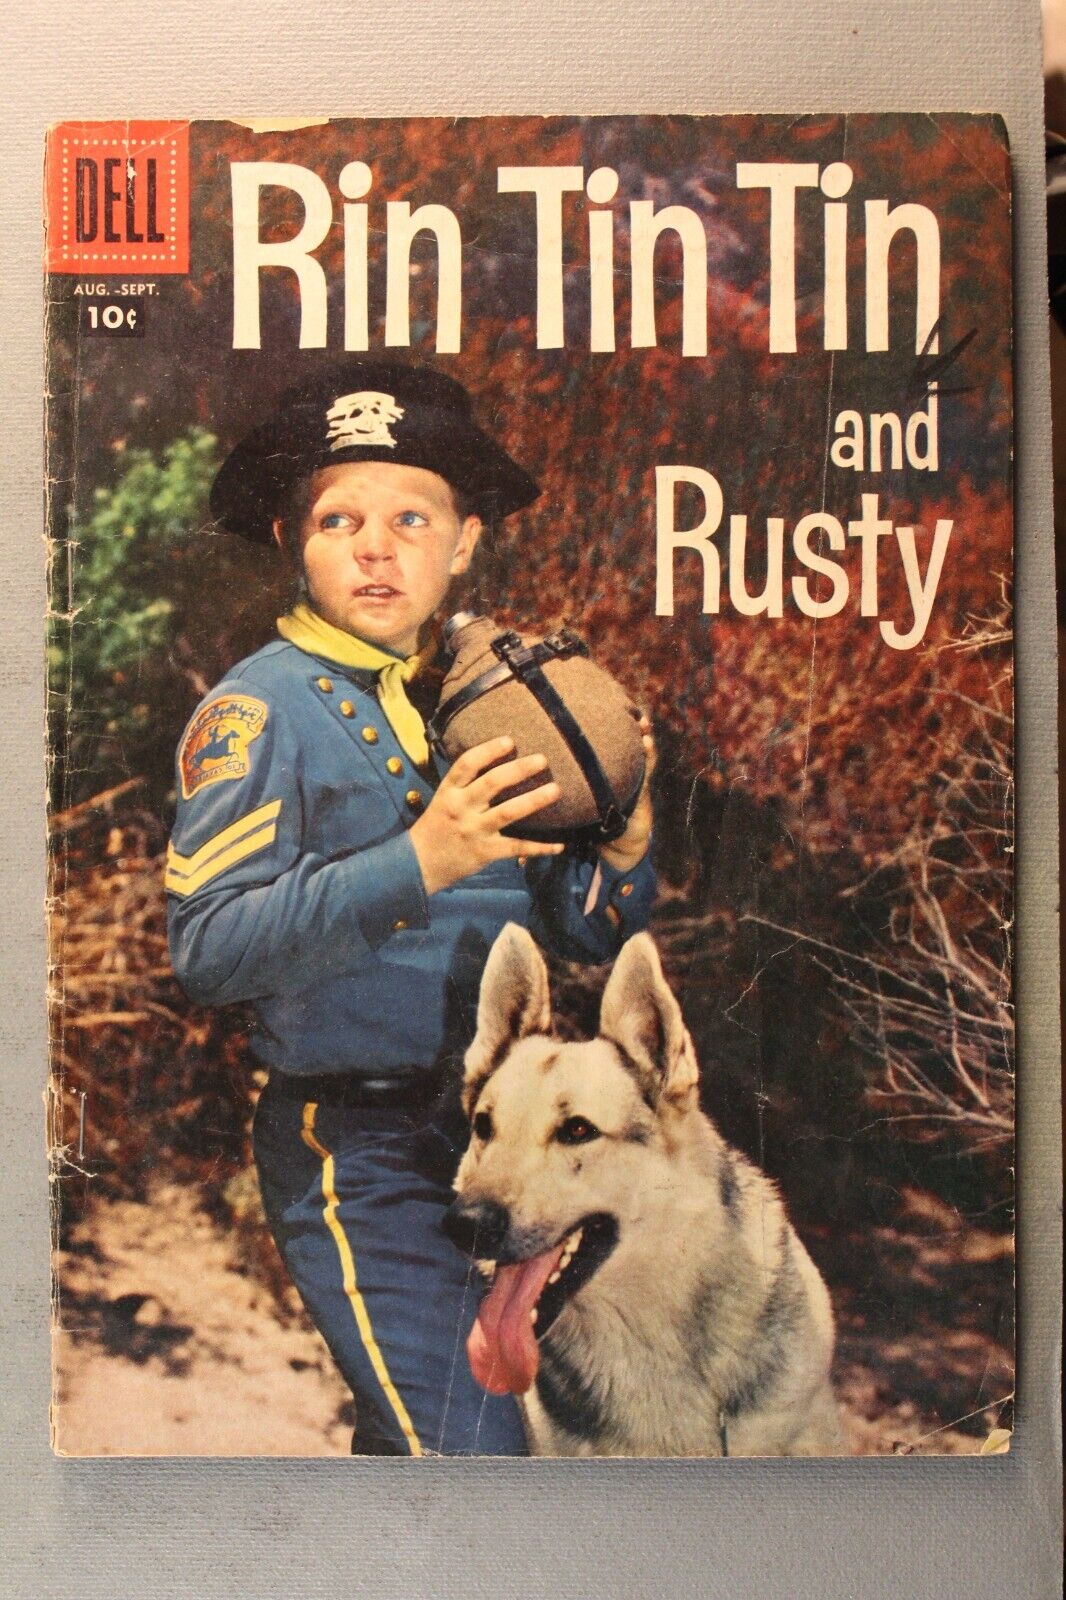 Rin Tin Tin and Rusty #20 ~ DELL Aug. - Sept. 10c \